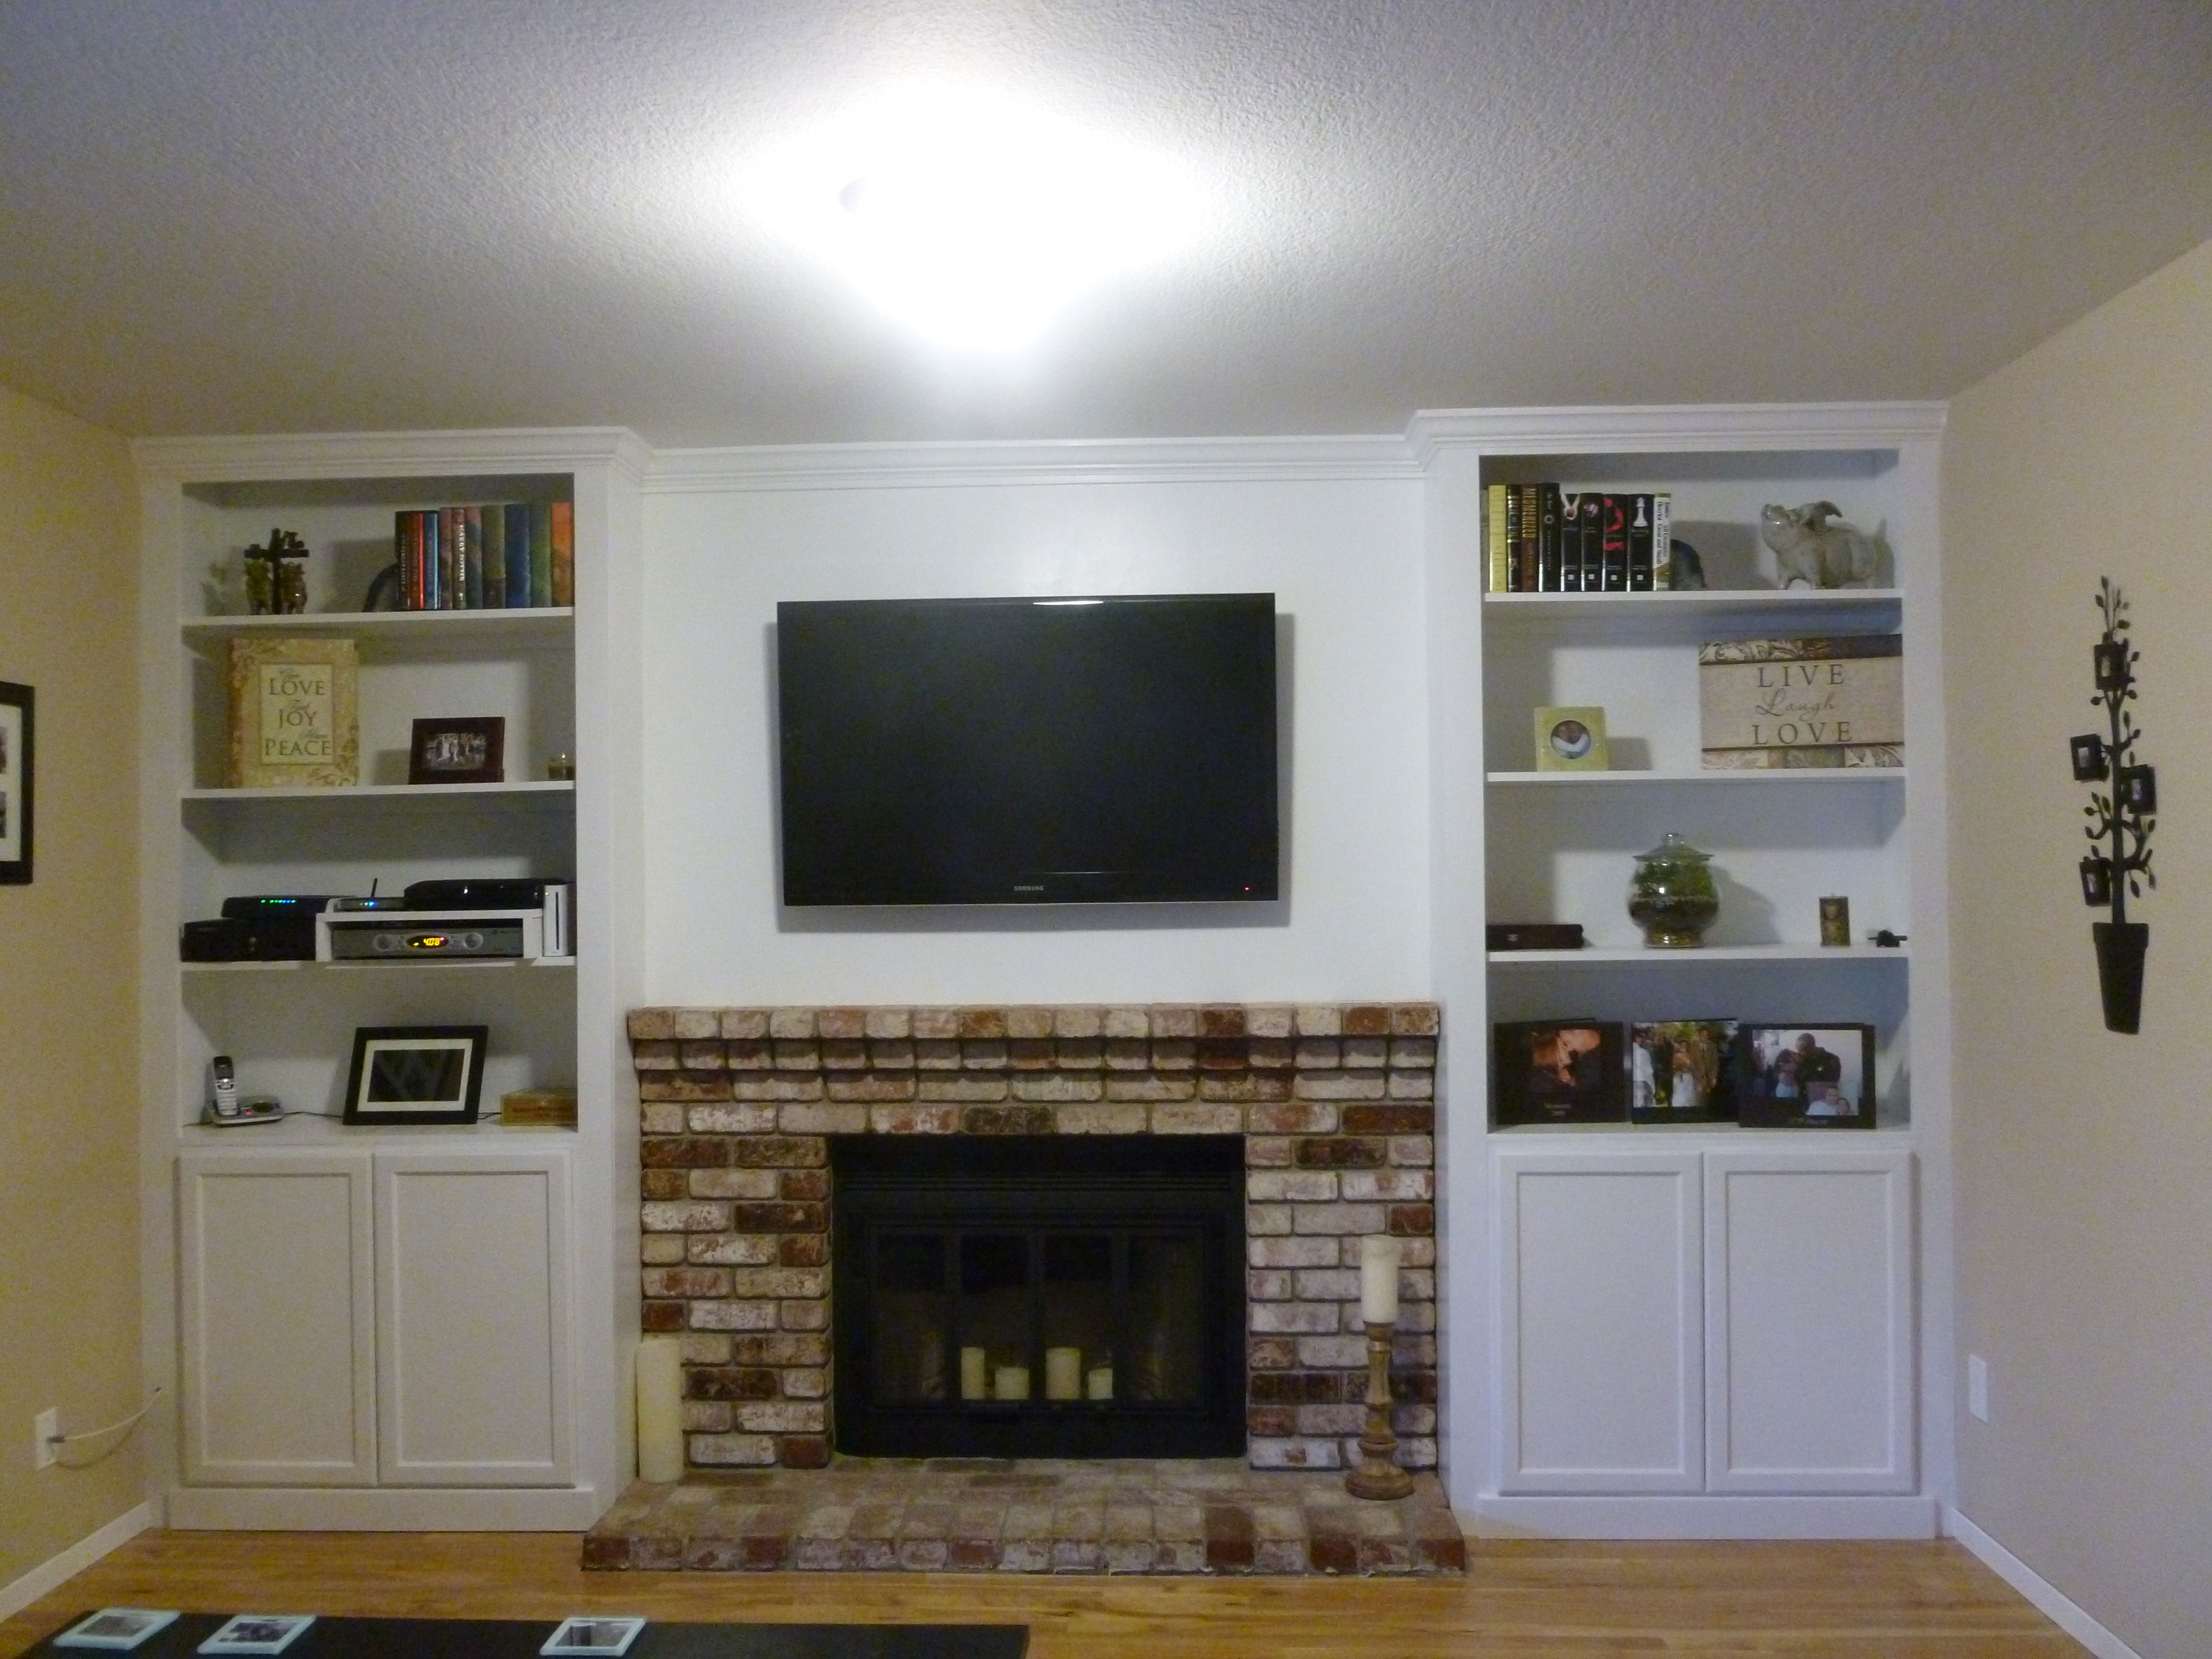 Woodland Direct Fireplace Awesome Fireplace with Built In Bookshelves Bing